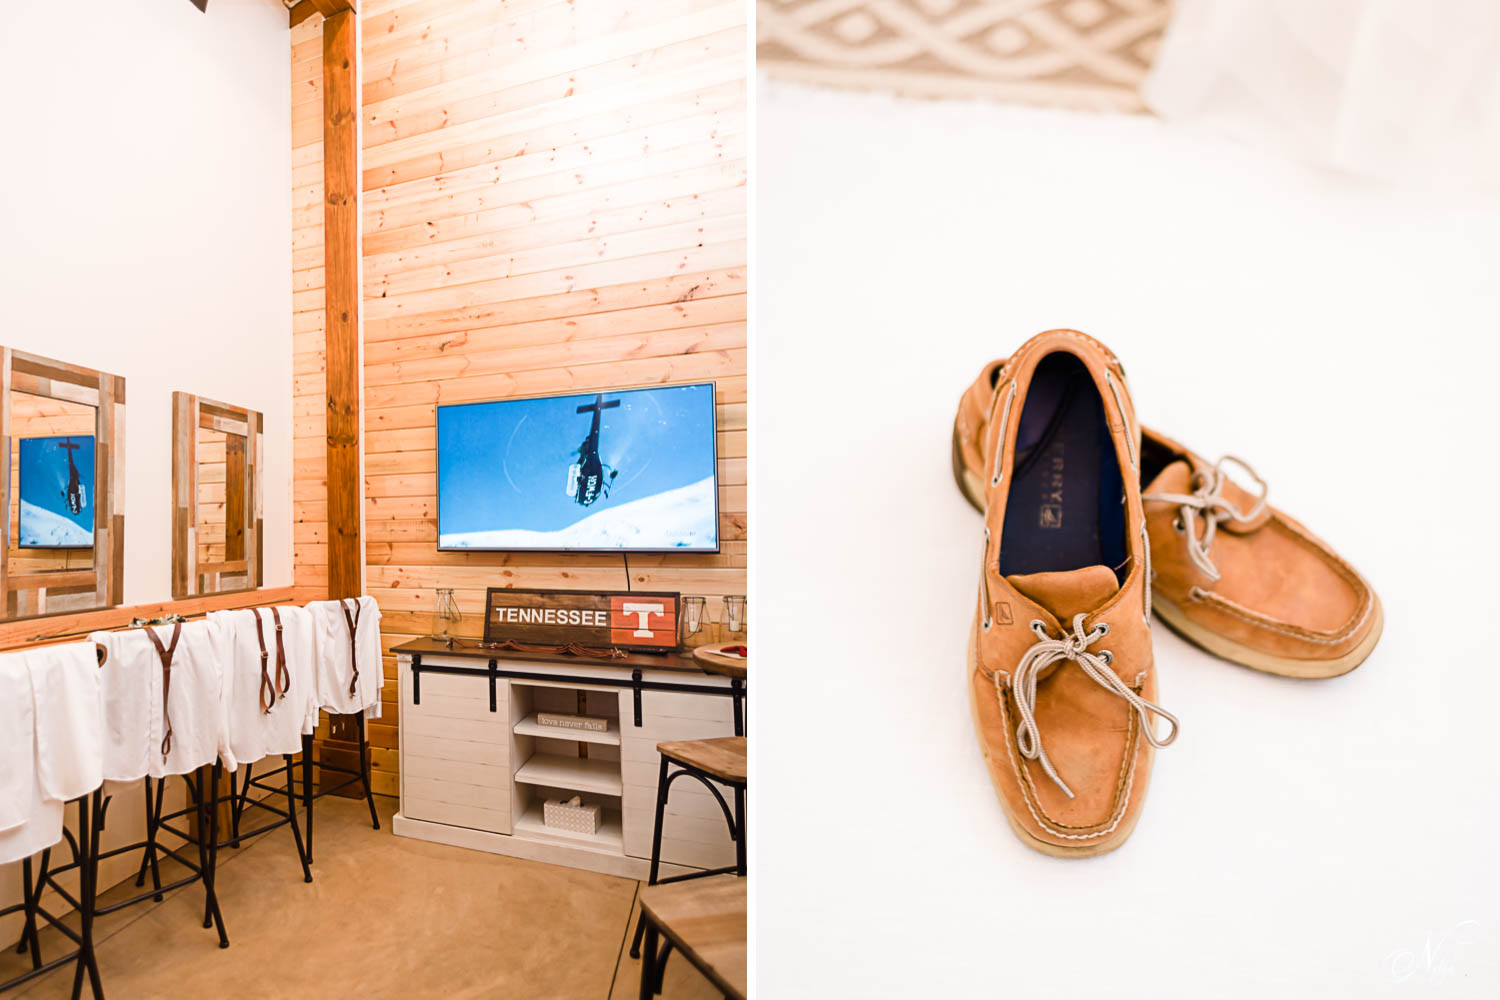 Inside of groom's suite at Hiwassee River Weddings in Dalano TN. and a pair of Sperry's shoes.